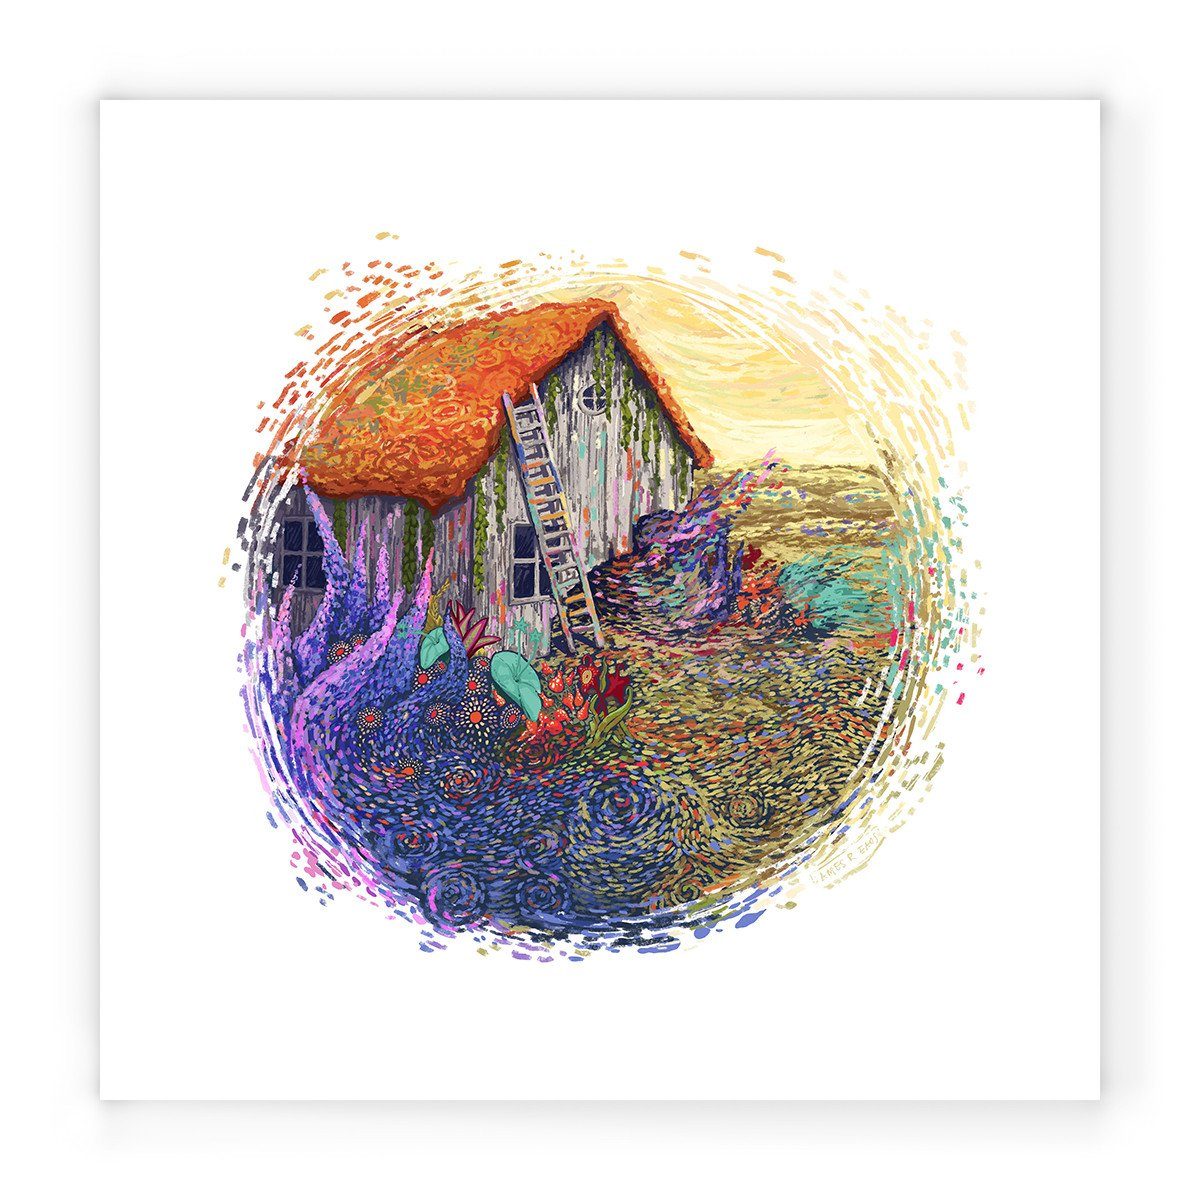 This is It (Limited Edition of 75) Print James R. Eads